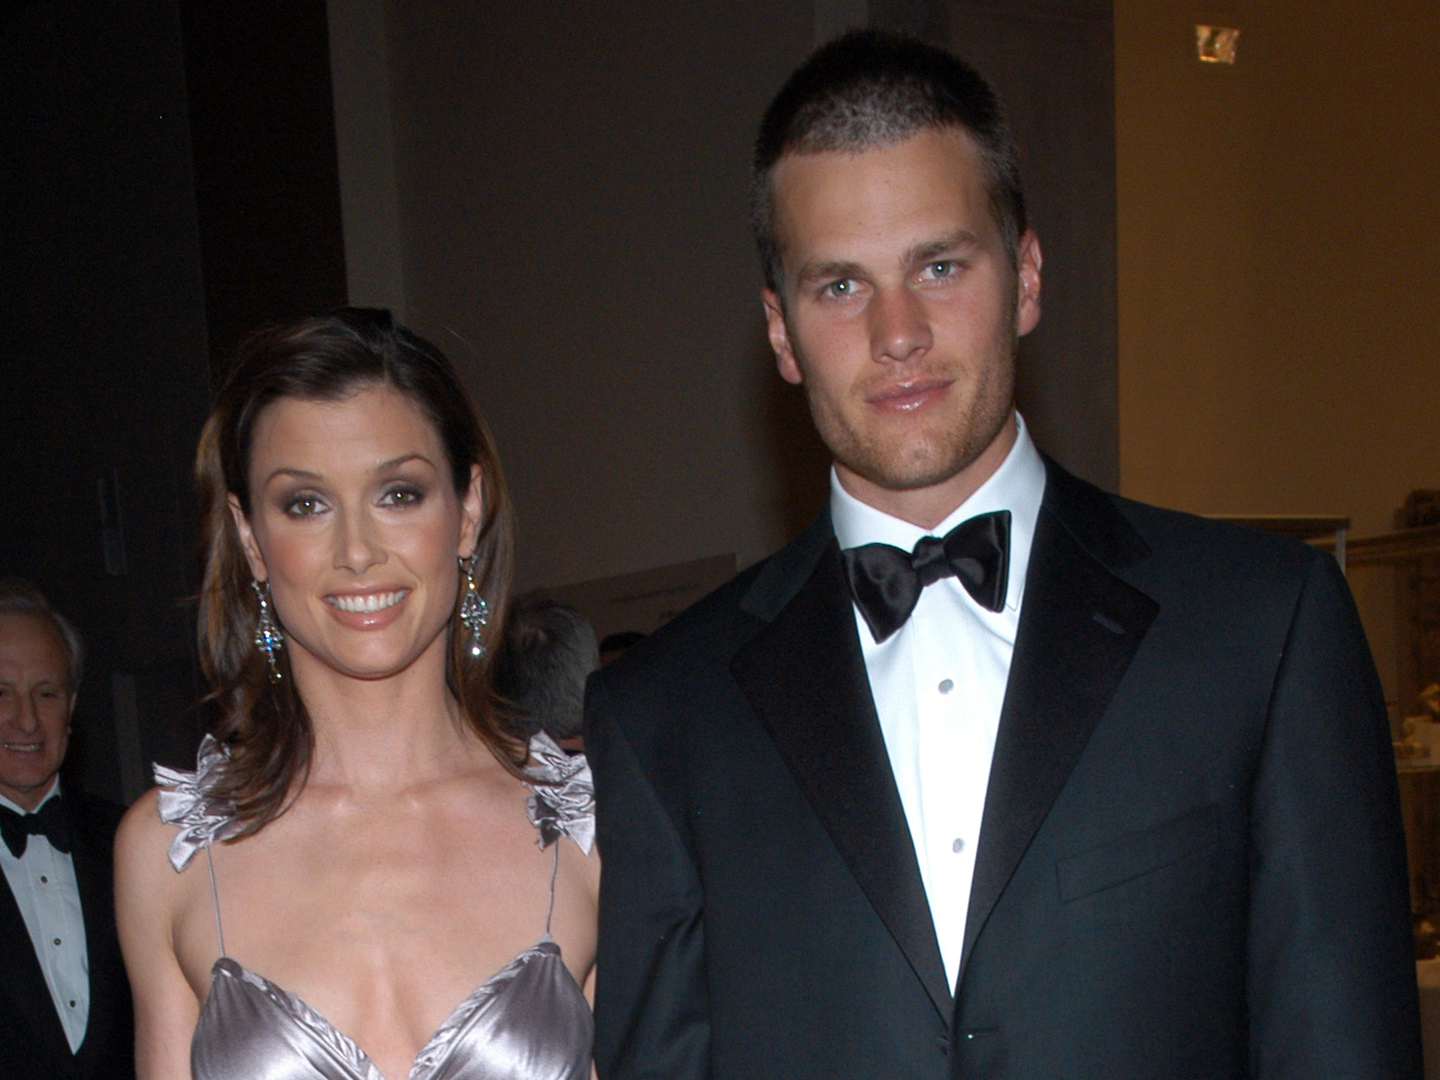 Tom Brady’s Roast Is Shining a Whole New Light on His Relationship With Bridget Moynahan